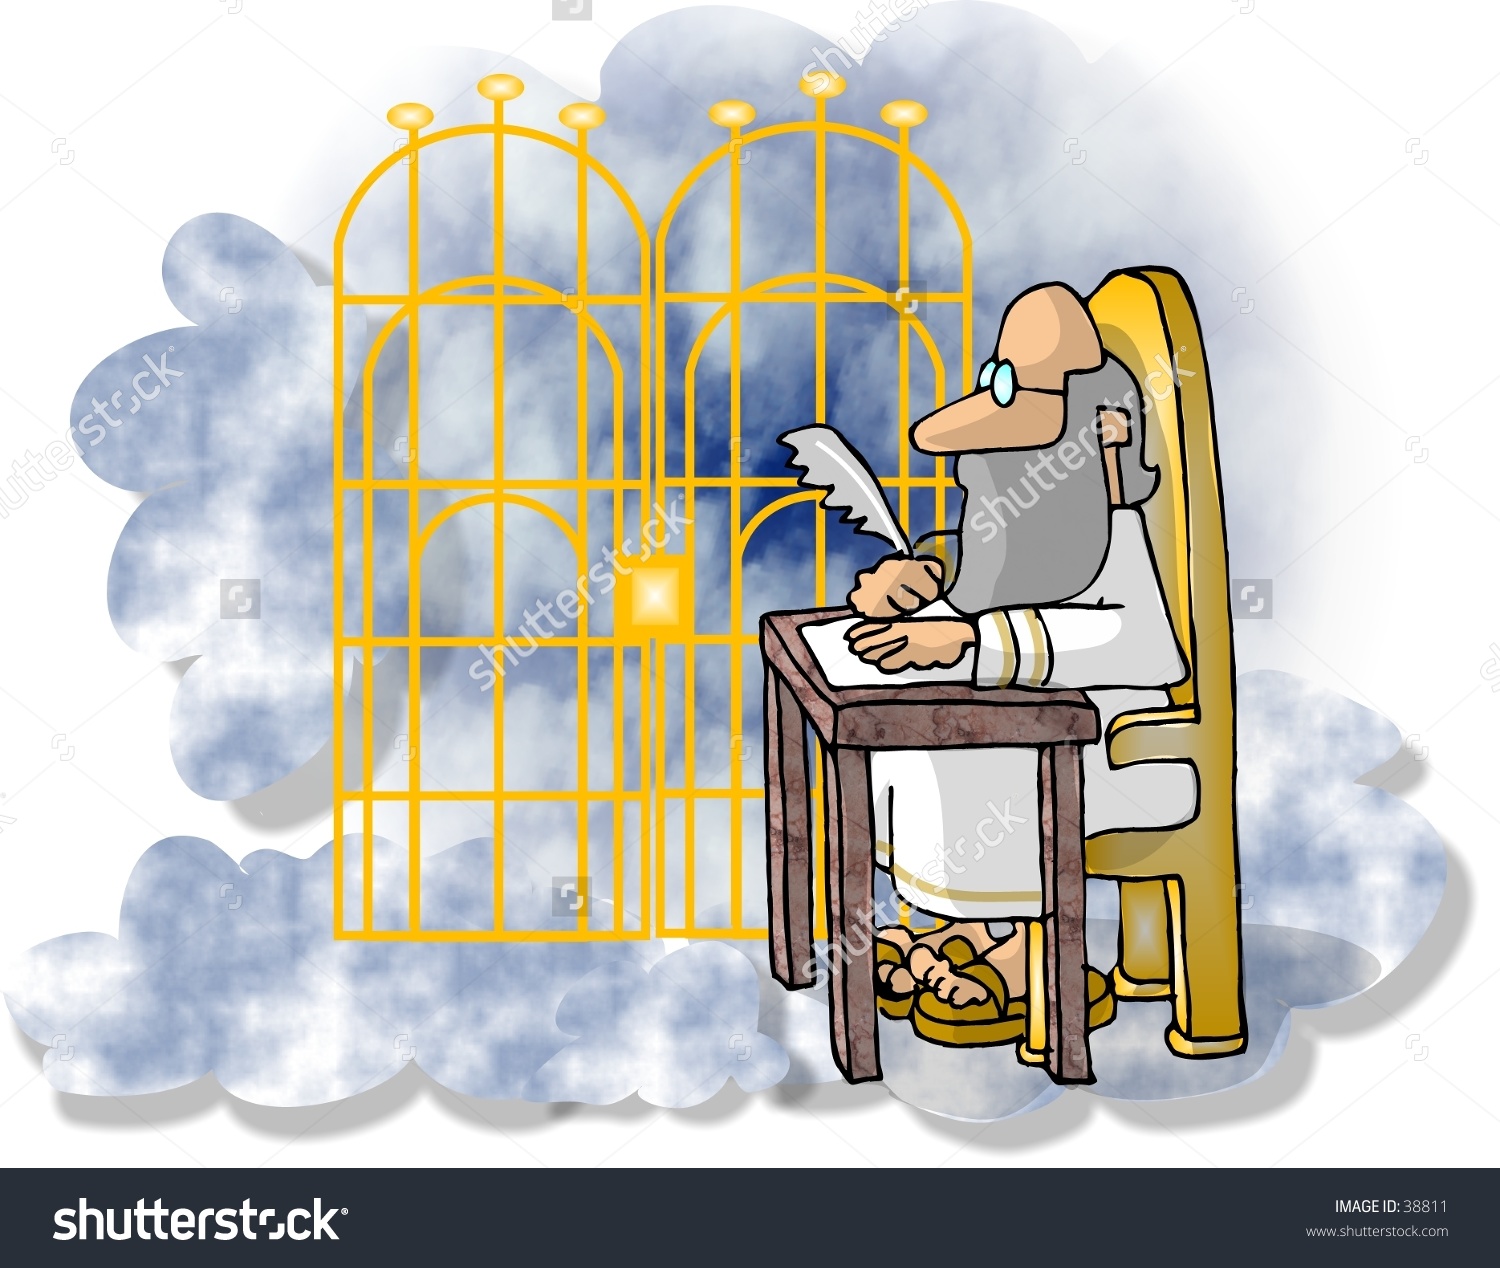 Clipart Illustration St Peter Pearly Gates Stock Illustration.